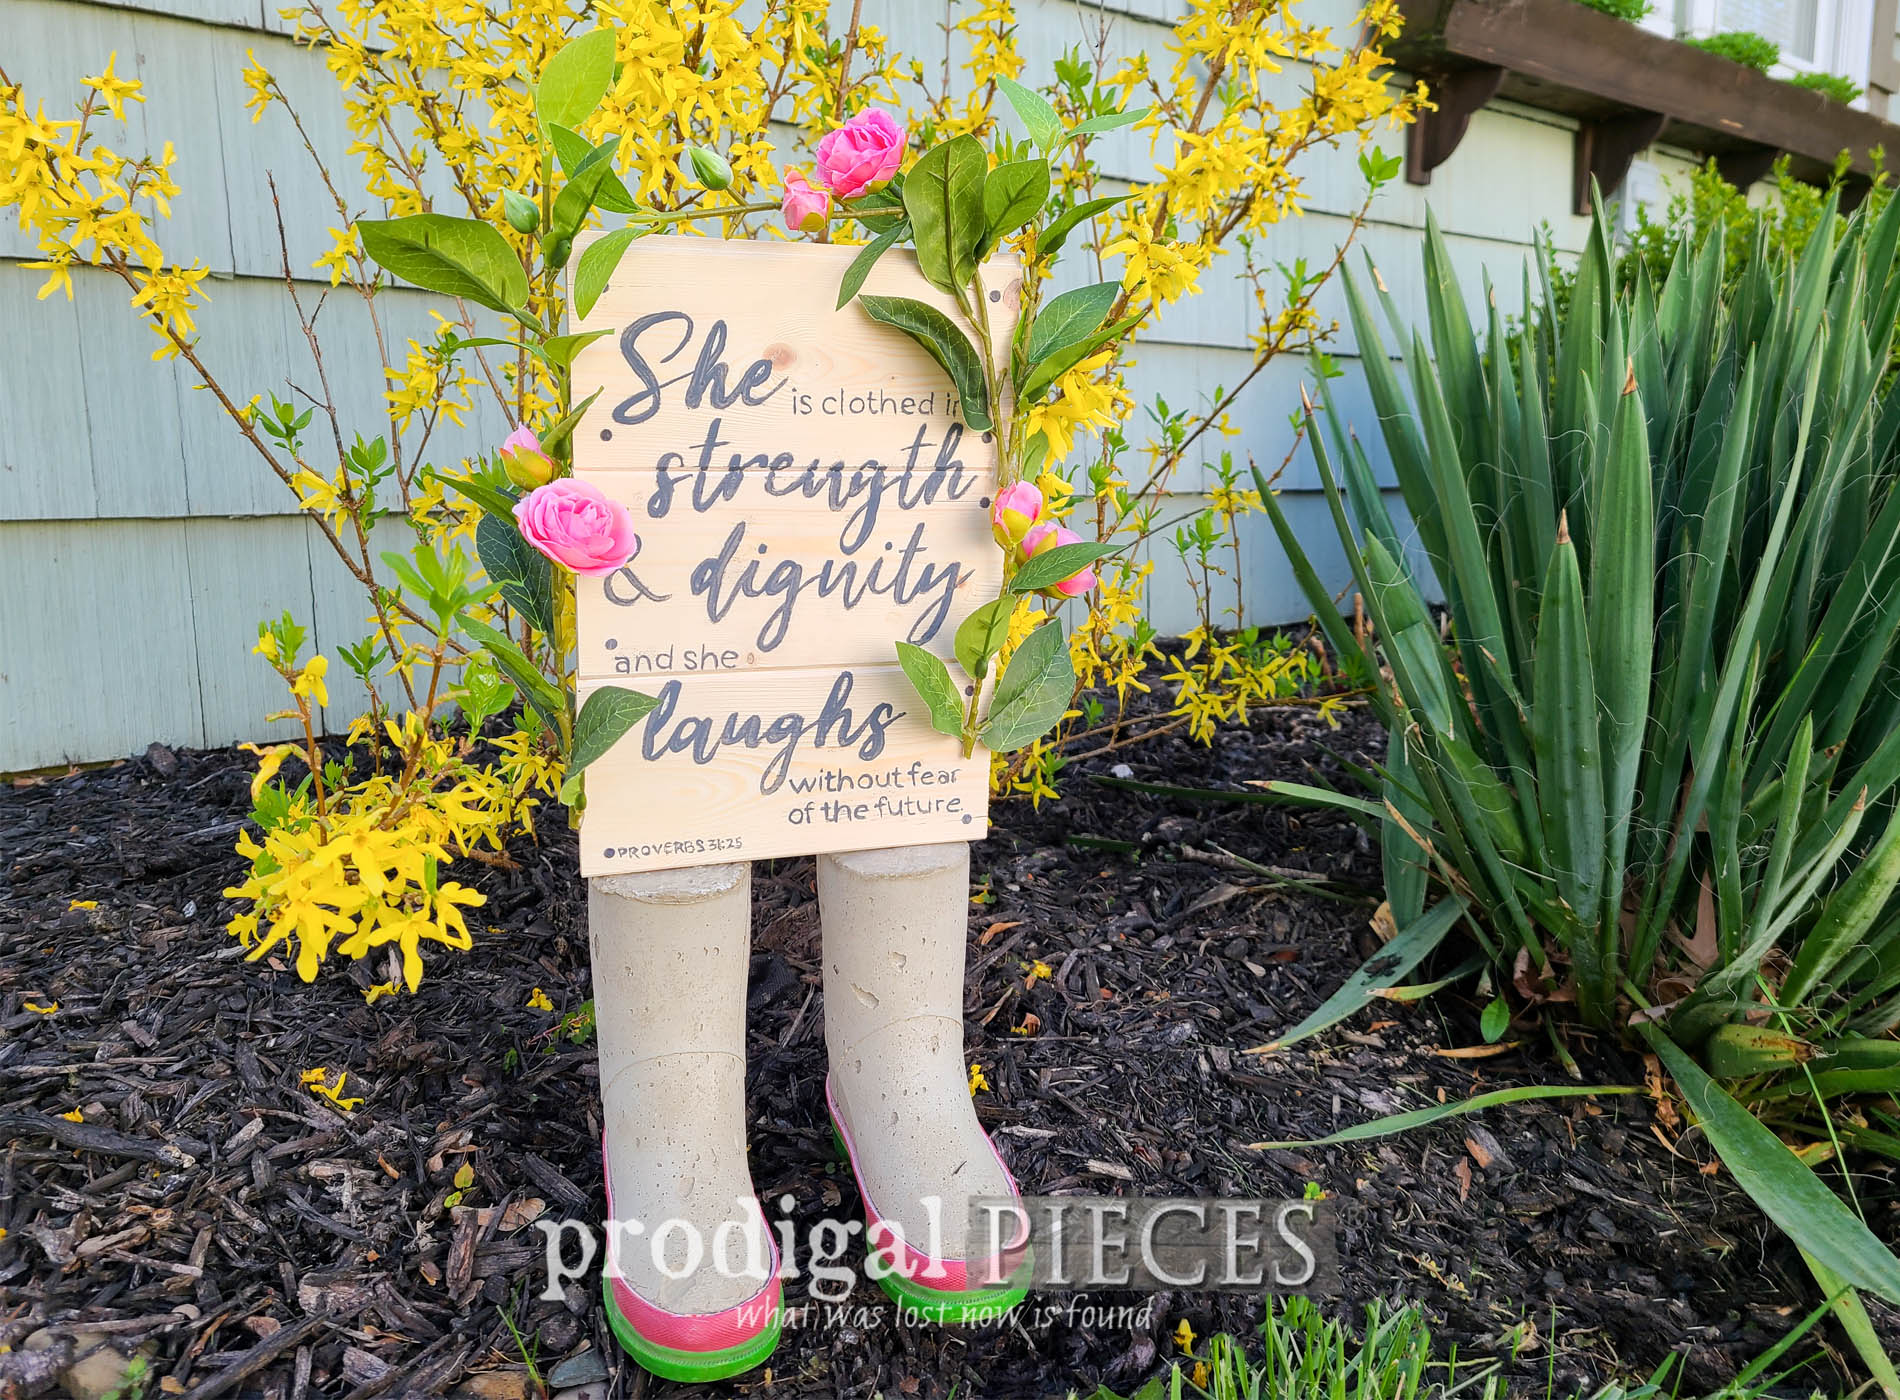 Featured DIY Concrete Boot Sign for a DIY Mother's Day by Larissa of Prodigal Pieces | prodigalpieces.com #prodigalpieces #mothersday #diy #repurposed #upcycled